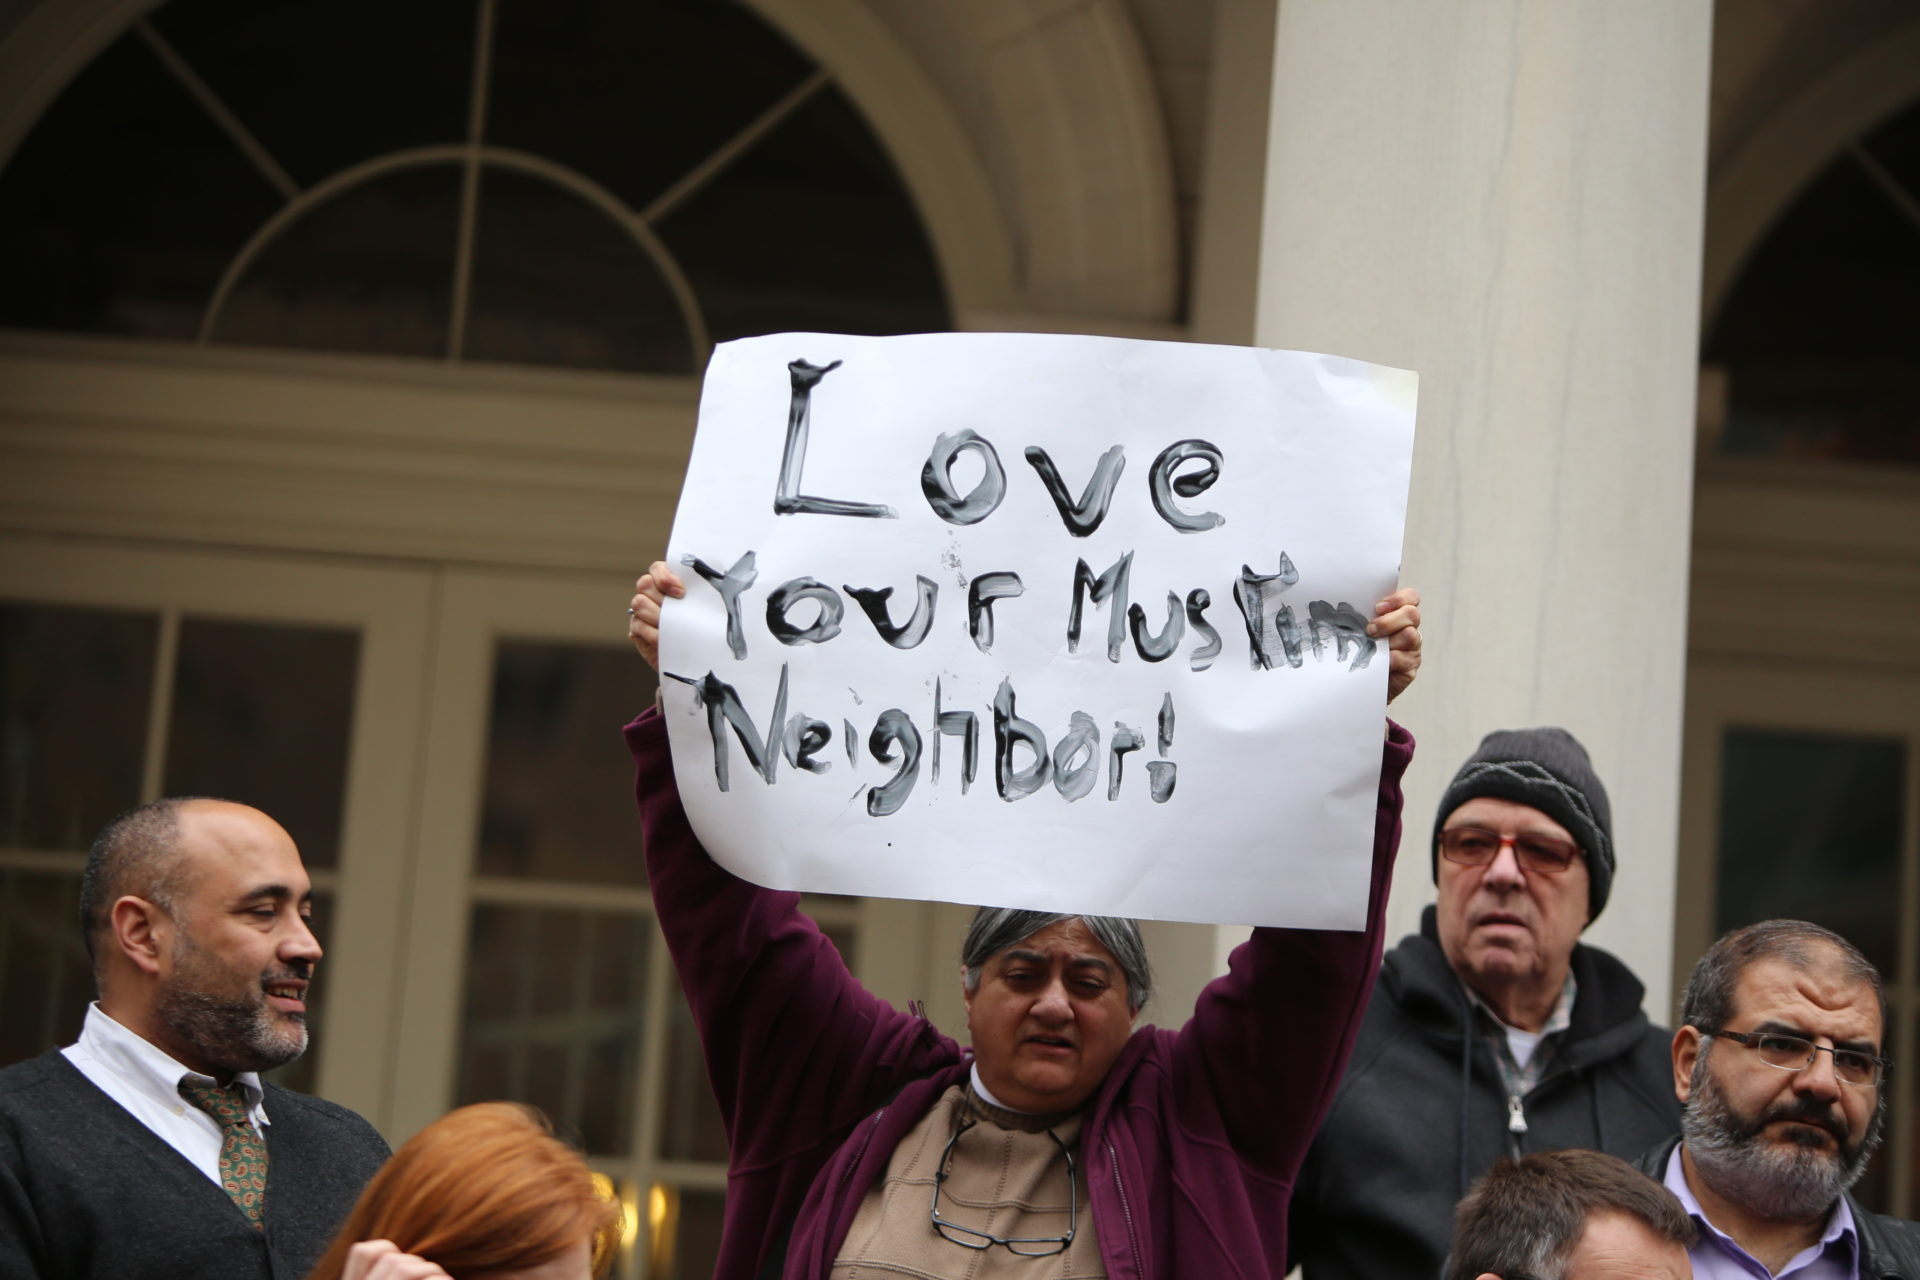 Getting to Know Your Muslim Neighbors